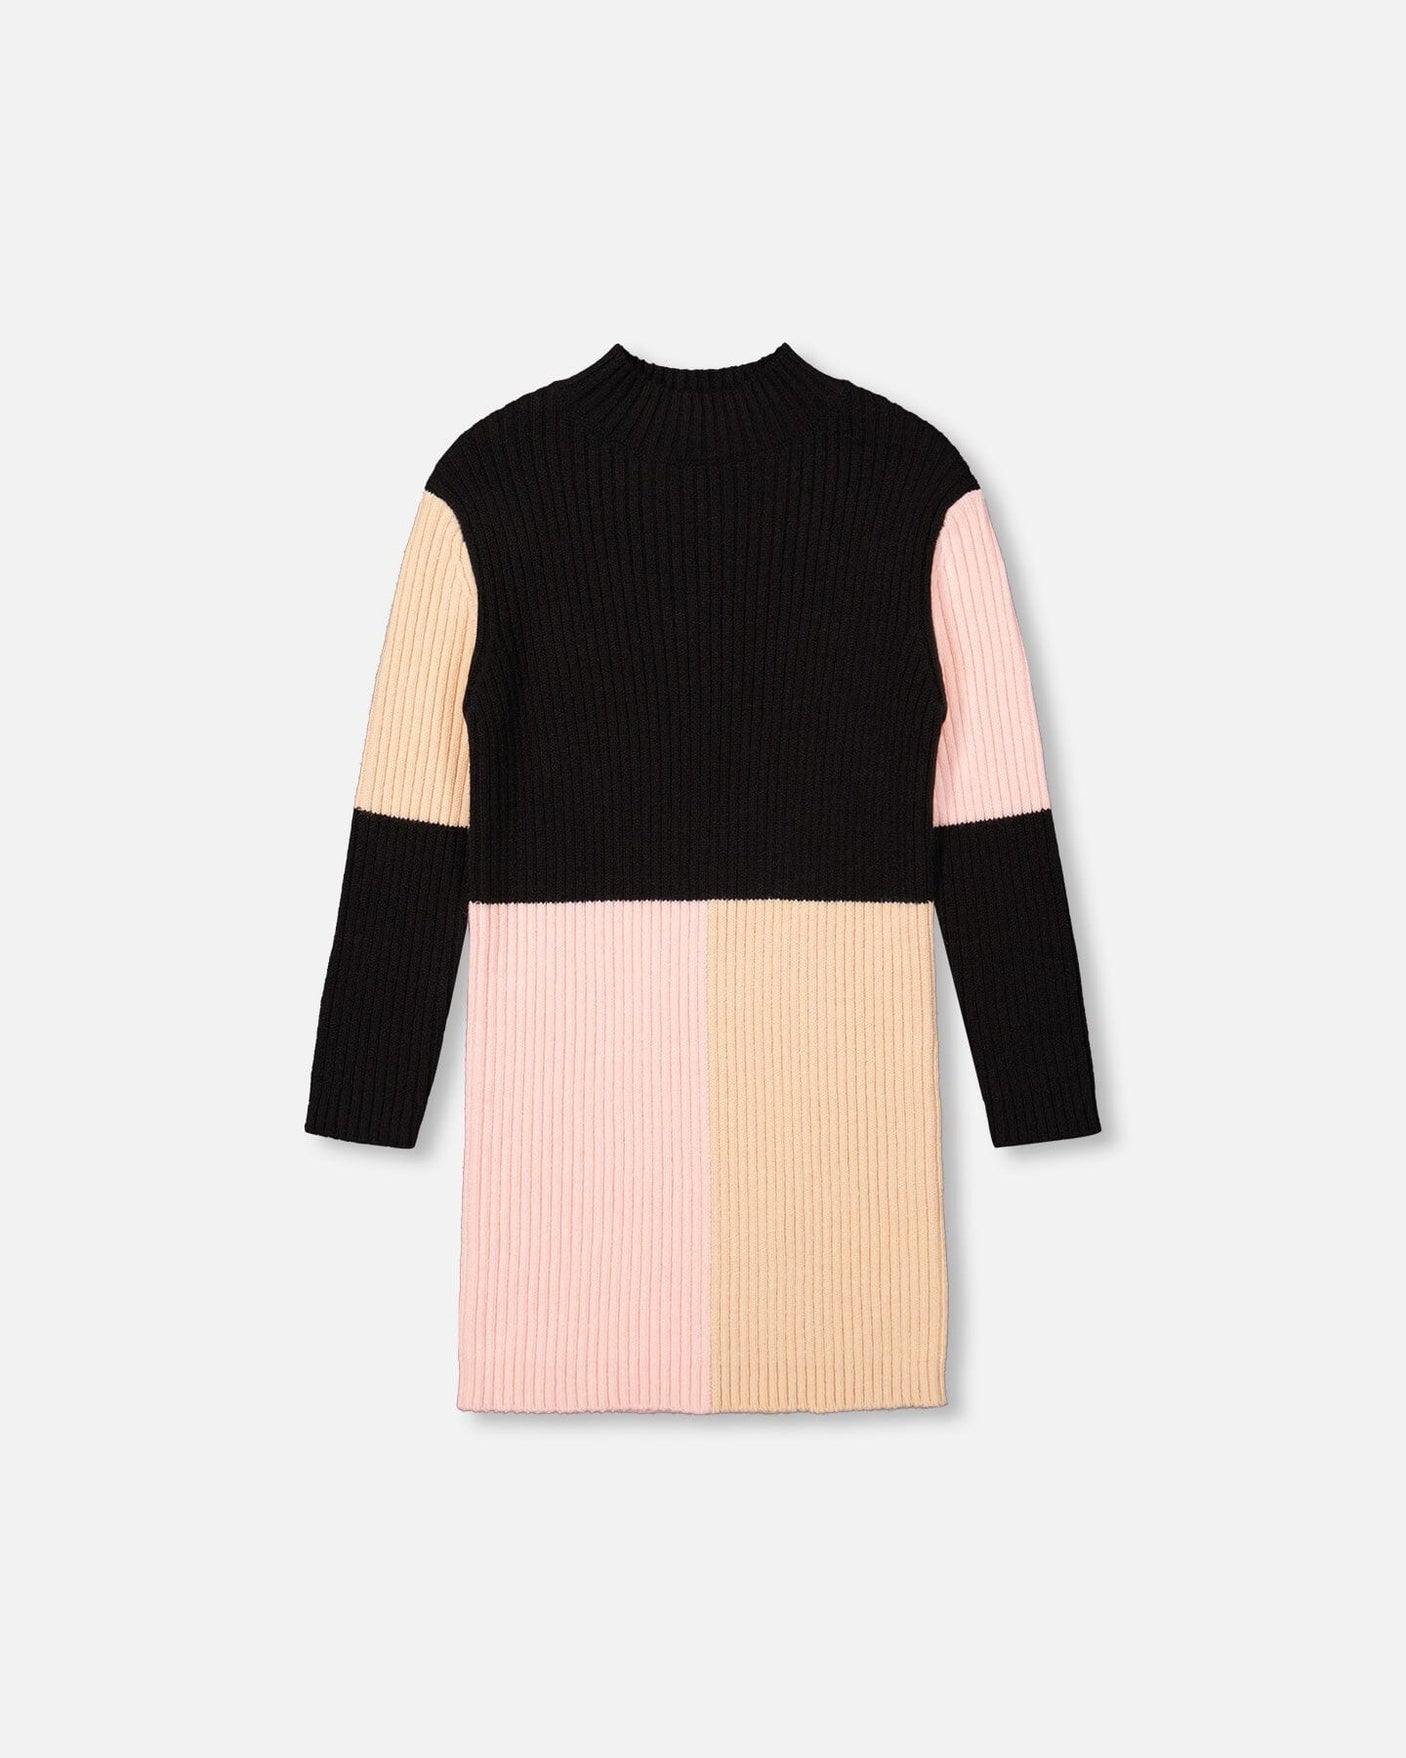 Color Block Knitted Sweater Dress Pink, Beige And Black-0